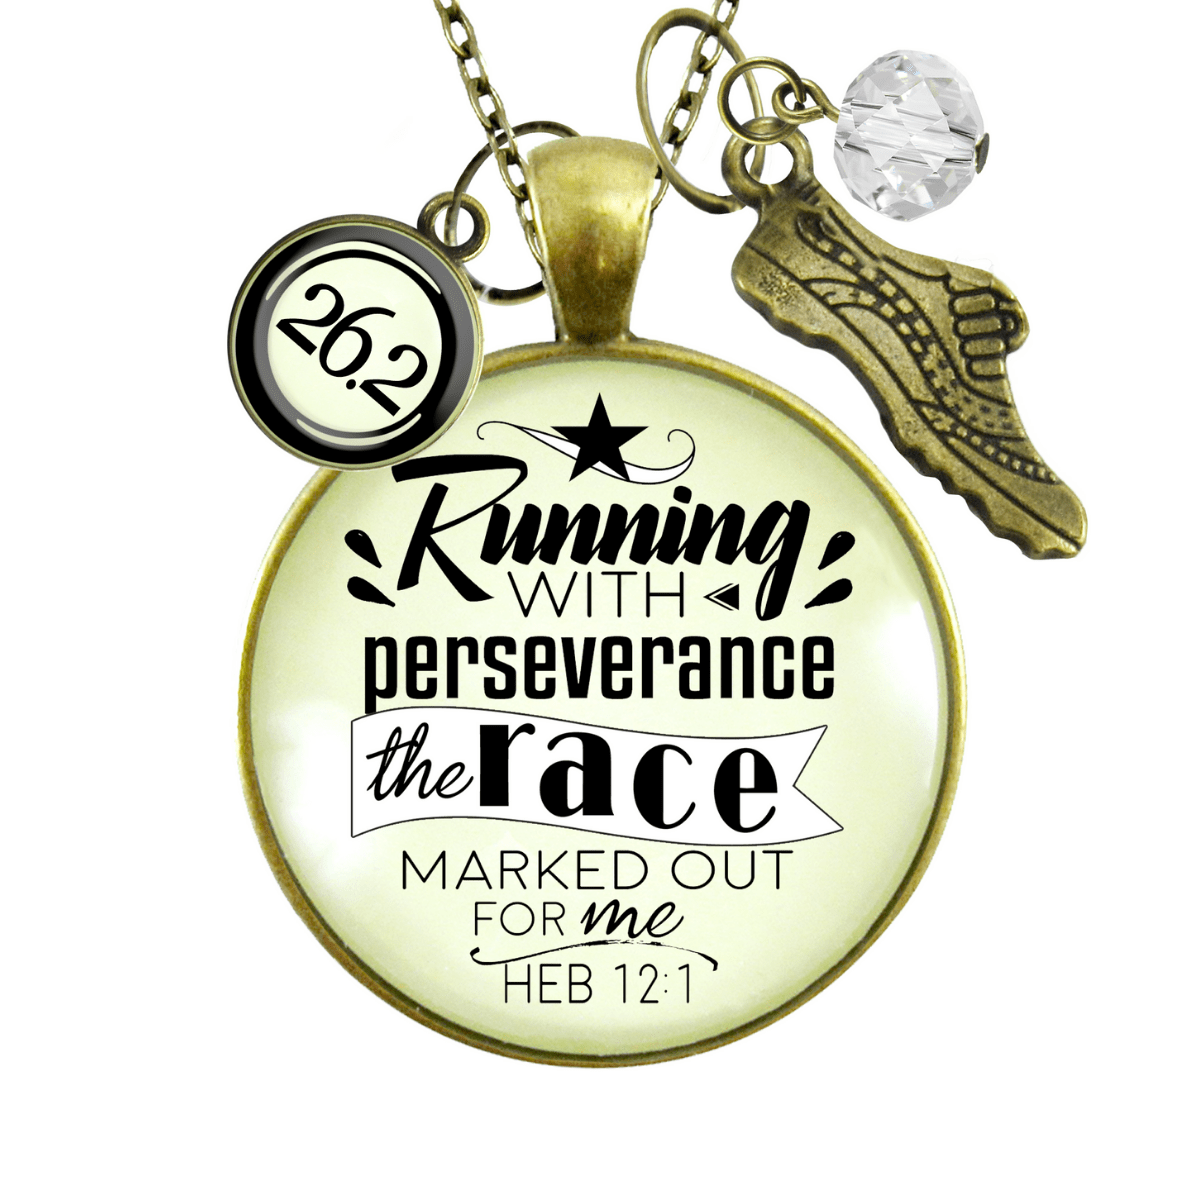 Running The Race With Perseverance 26.2 Marathon - Gutsy Goodness Handmade Jewelry Gifts